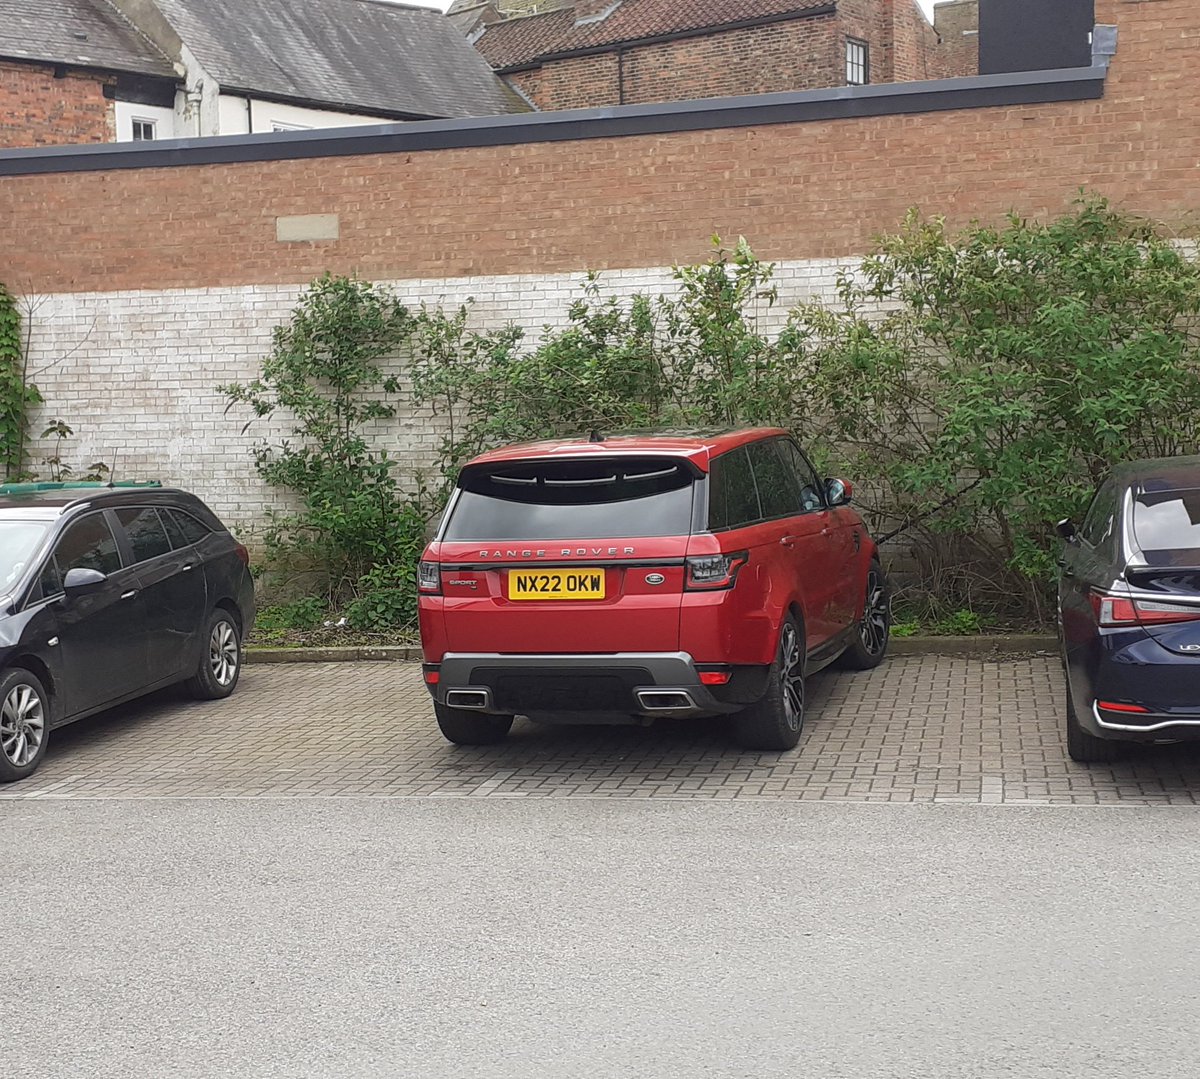 AN INTRODUCTION TO PARKING IN THE HARROGATE POST CODE AREA . . . . LESSON ONE ' FUCK ANYONE ELSE, IVE GOT A RANGE ROVER'